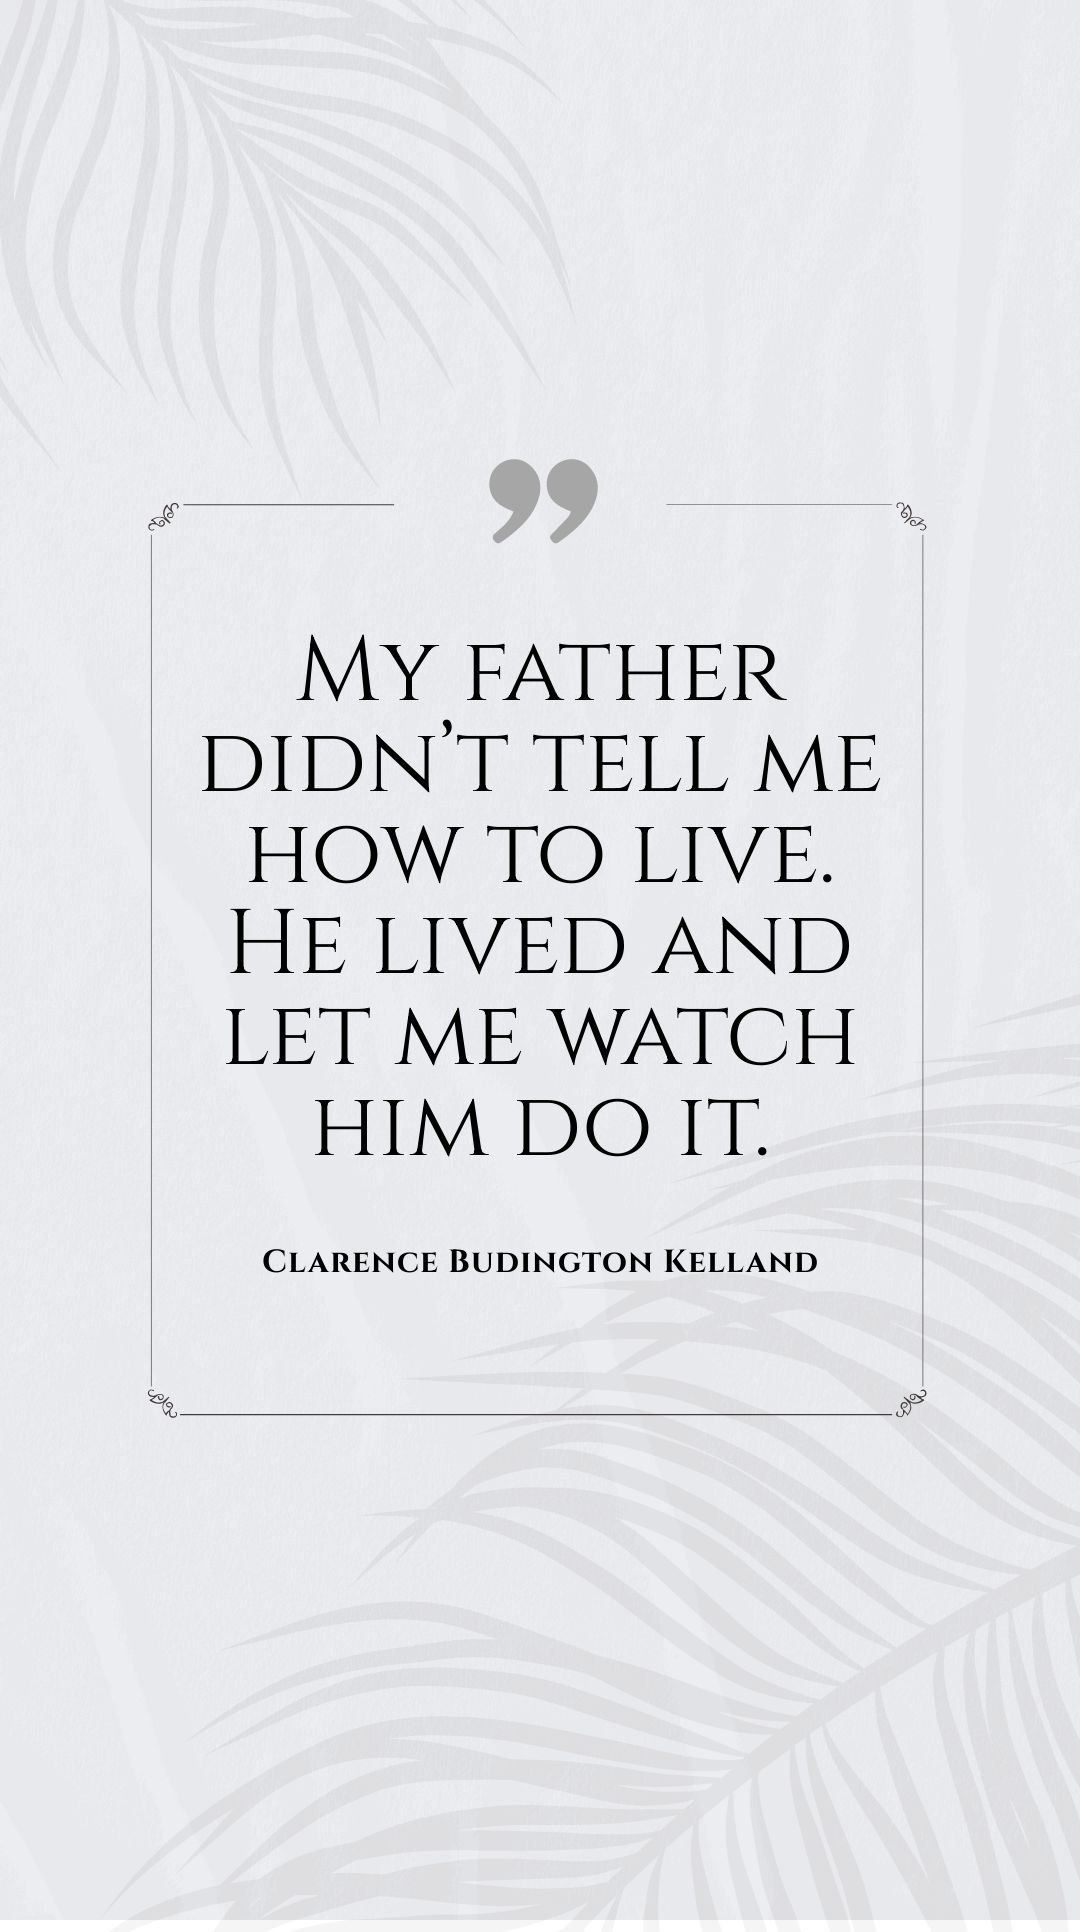 Free Clarence Budington Kelland - “My father didn’t tell me how to live. He lived and let me watch him do it.” in JPG